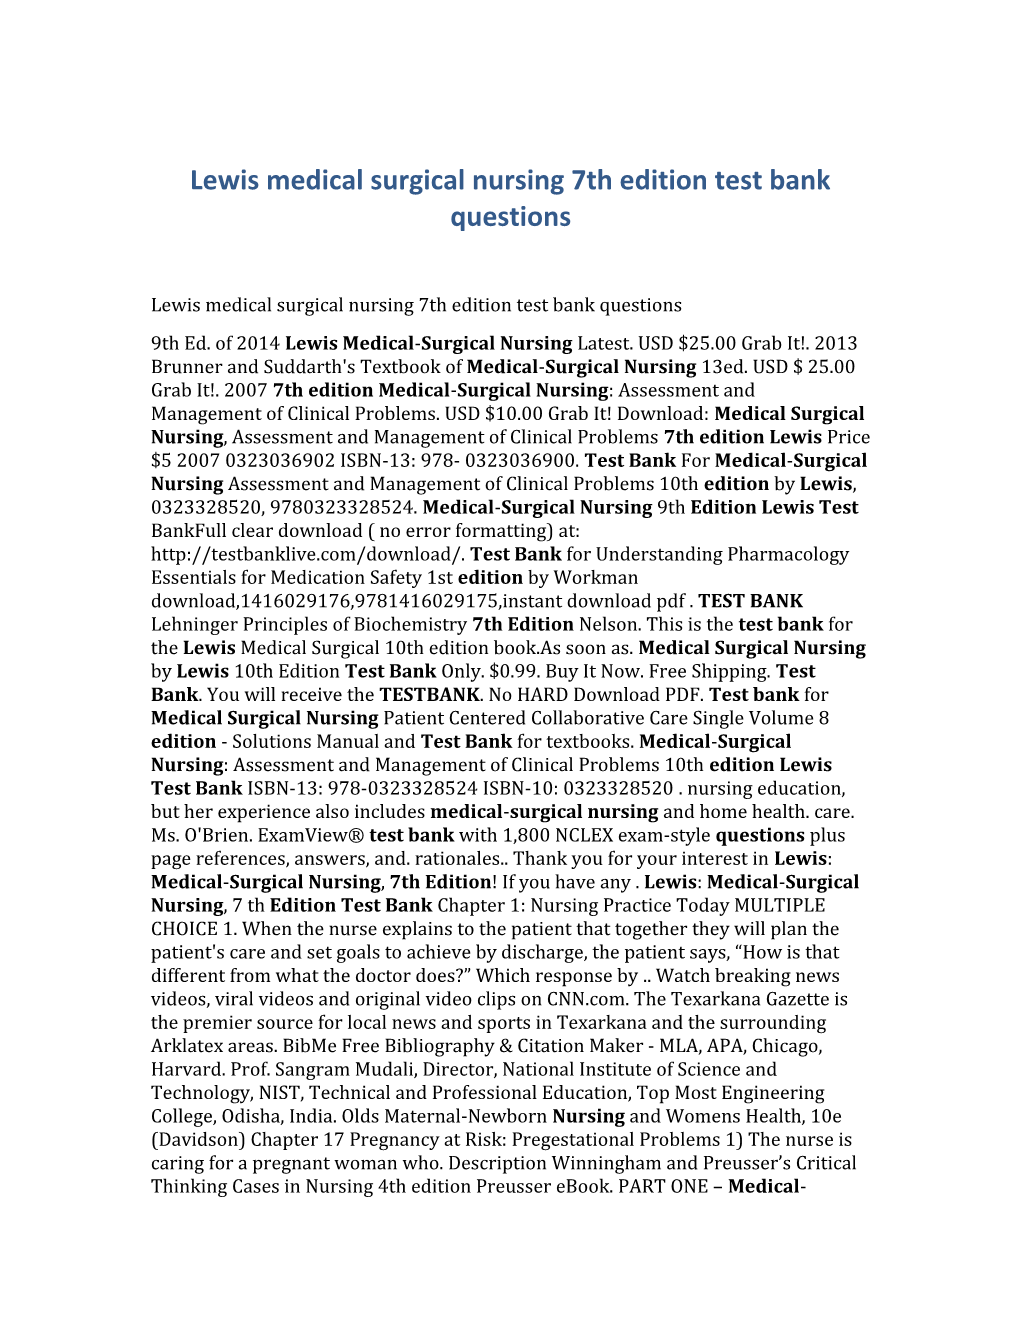 Lewis Medical Surgical Nursing 7Th Edition Test Bank Questions